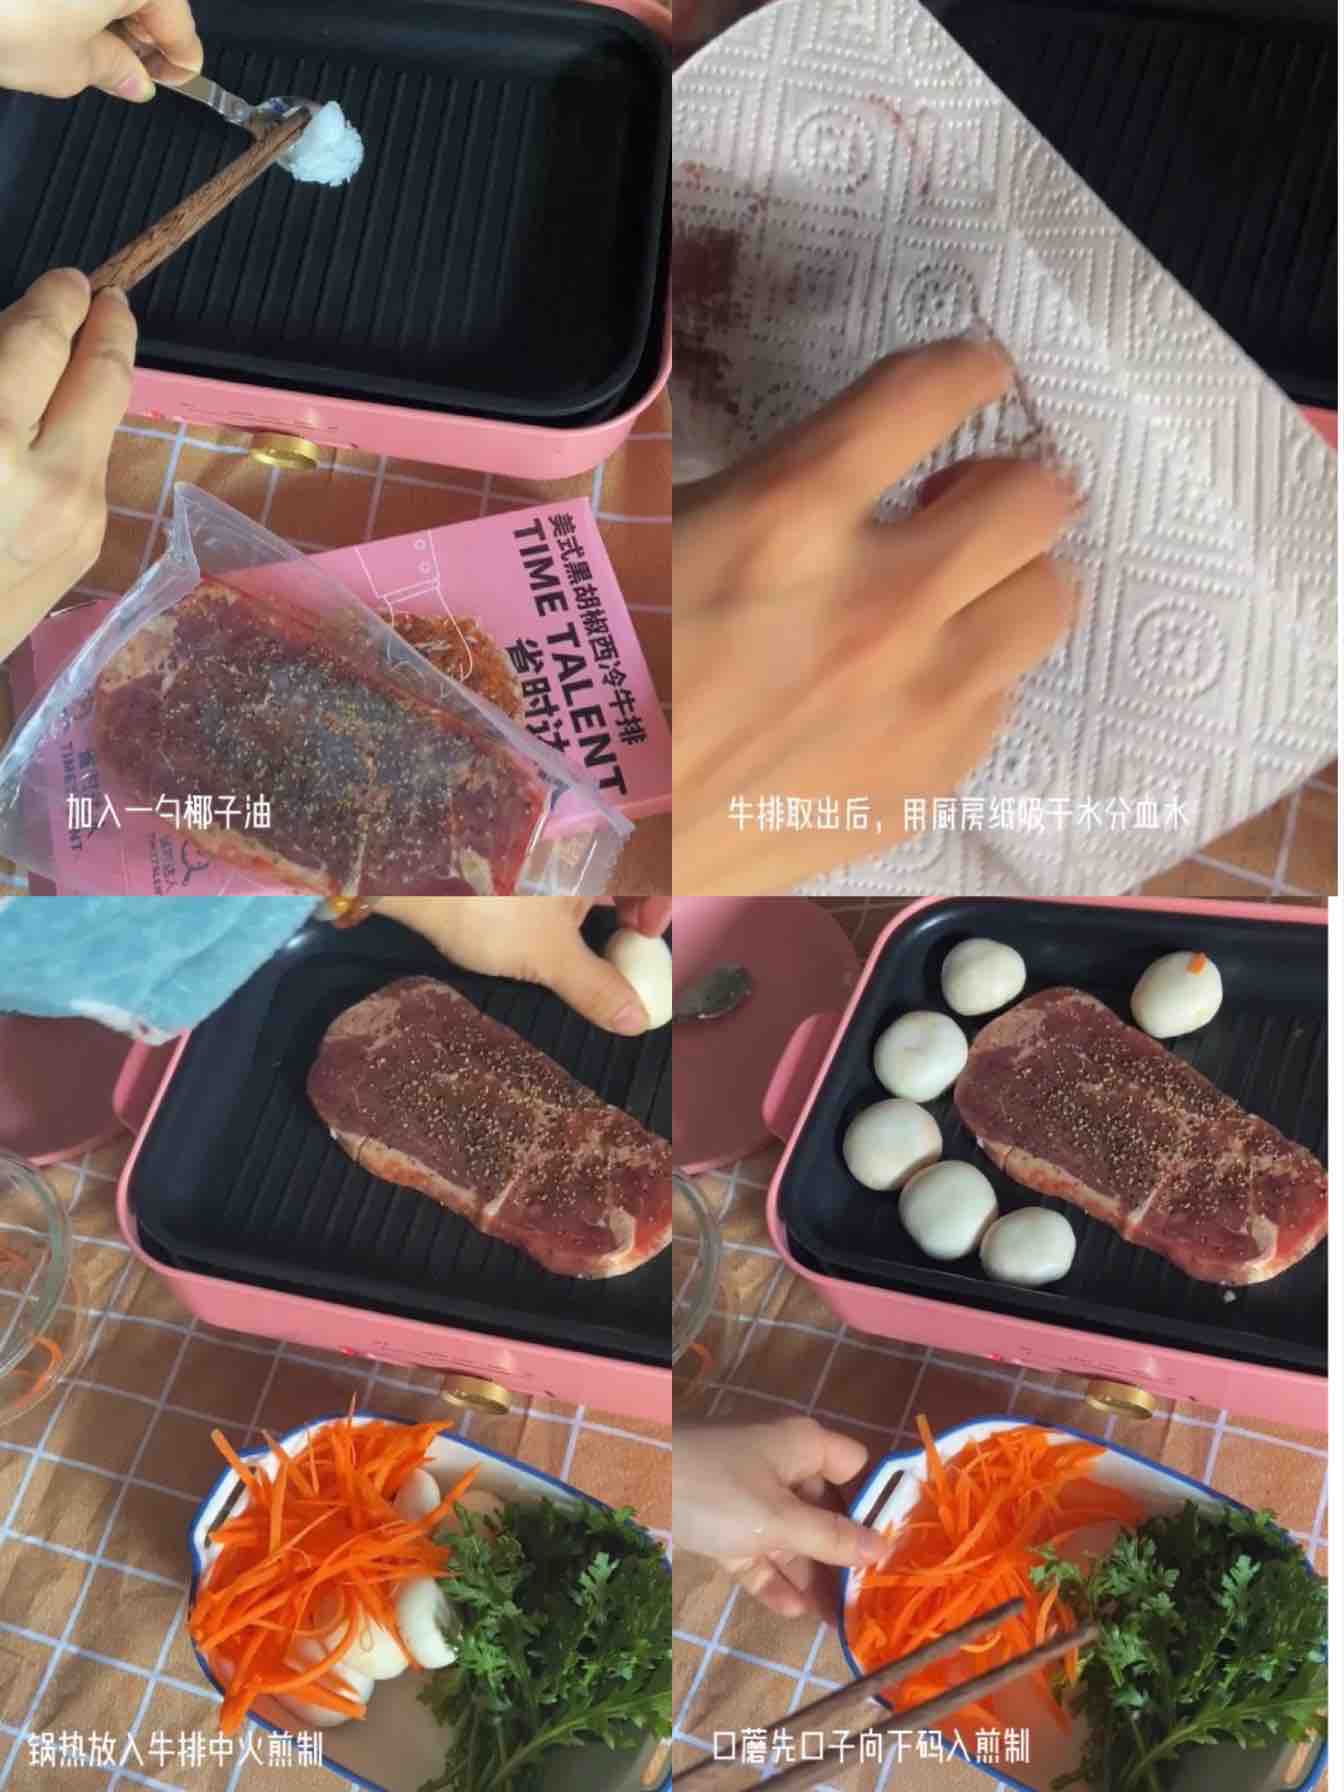 Homestay Can Also Have A Big Meal~~holiday Steak recipe